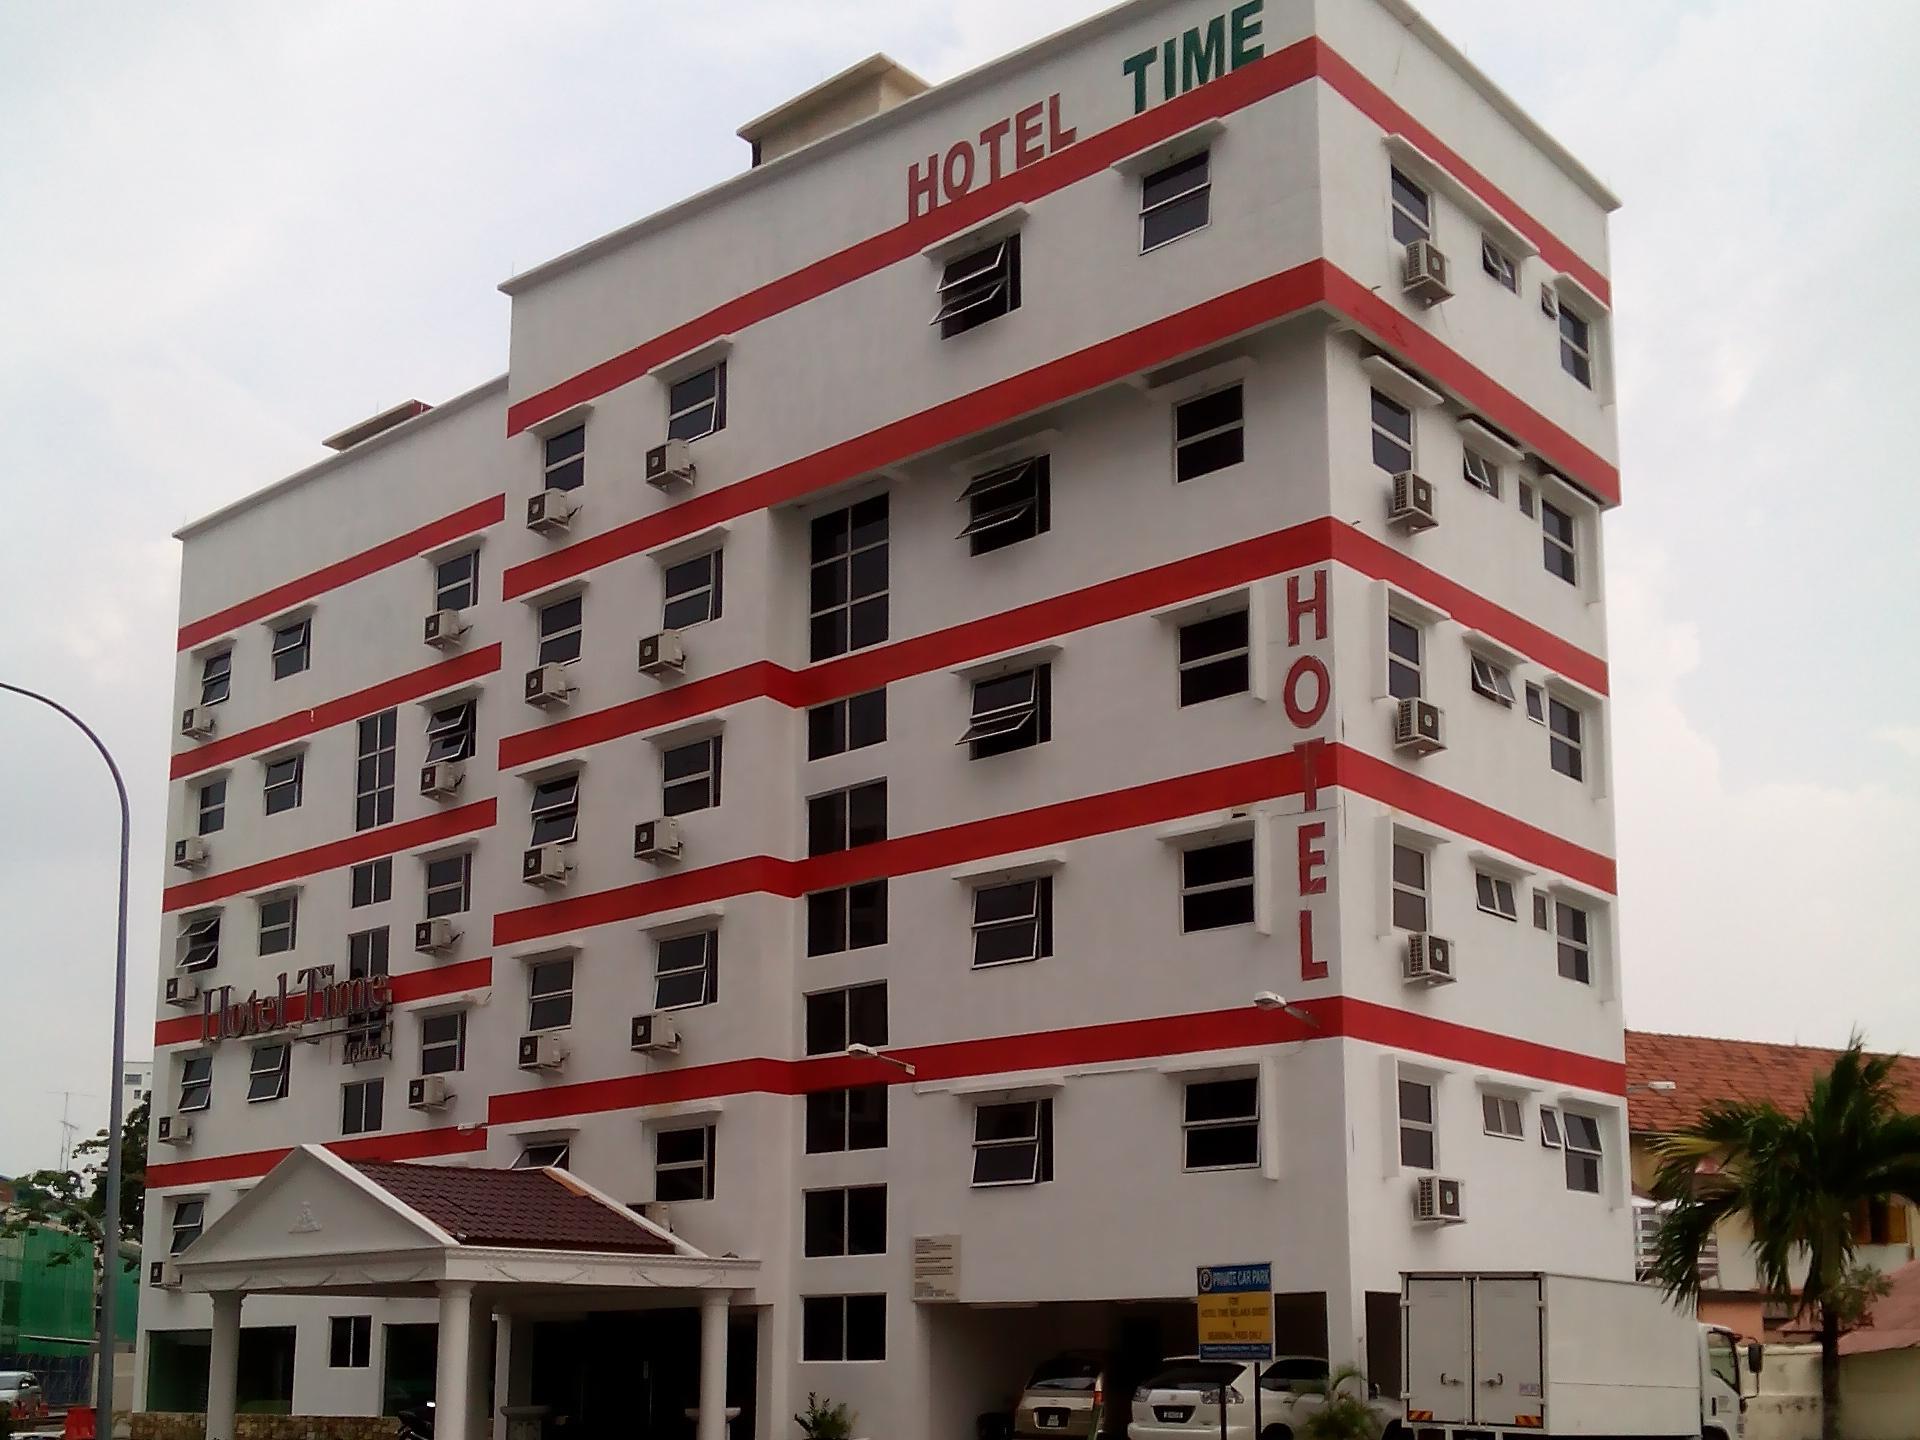 Time Hotel Melaka Malacca
 FAQ 2016, What facilities are there in Time Hotel Melaka Malacca
 2016, What Languages Spoken are Supported in Time Hotel Melaka Malacca
 2016, Which payment cards are accepted in Time Hotel Melaka Malacca
 , Malacca
 Time Hotel Melaka room facilities and services Q&A 2016, Malacca
 Time Hotel Melaka online booking services 2016, Malacca
 Time Hotel Melaka address 2016, Malacca
 Time Hotel Melaka telephone number 2016,Malacca
 Time Hotel Melaka map 2016, Malacca
 Time Hotel Melaka traffic guide 2016, how to go Malacca
 Time Hotel Melaka, Malacca
 Time Hotel Melaka booking online 2016, Malacca
 Time Hotel Melaka room types 2016.